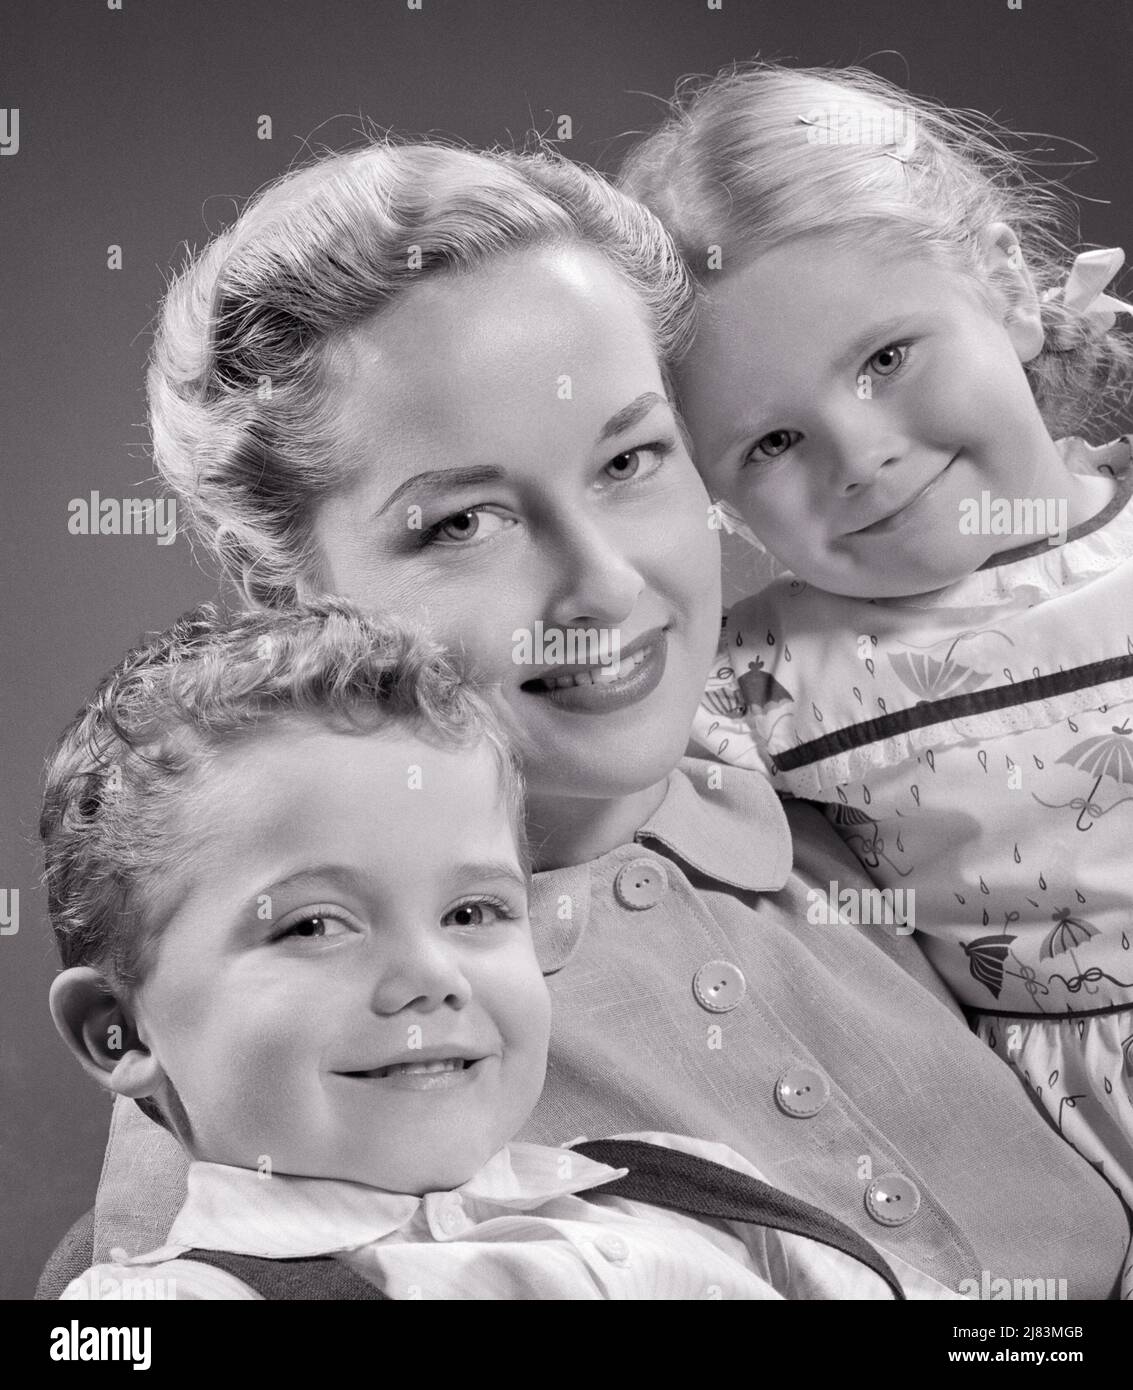 1950s SMILING PORTRAIT OF BLONDE MOTHER WITH TWO CHILDREN A BOY AND A GIRL ALL LOOKING AT CAMERA - j2719 HAR001 HARS OLD TIME NOSTALGIA OLD FASHION SISTER 1 JUVENILE STYLE YOUNG ADULT STRONG SONS PLEASED FAMILIES JOY LIFESTYLE SATISFACTION FEMALES STUDIO SHOT HEALTHINESS HOME LIFE COPY SPACE FRIENDSHIP HALF-LENGTH LADIES DAUGHTERS PERSONS CARING MALES SISTERS B&W EYE CONTACT HAPPINESS CHEERFUL PROTECTION AND PRIDE SMILES CONNECTION JOYFUL STYLISH PERSONAL ATTACHMENT AFFECTION COOPERATION EMOTION GROWTH MOMS TOGETHERNESS YOUNG ADULT WOMAN BLACK AND WHITE CAUCASIAN ETHNICITY HAR001 OLD FASHIONED Stock Photo